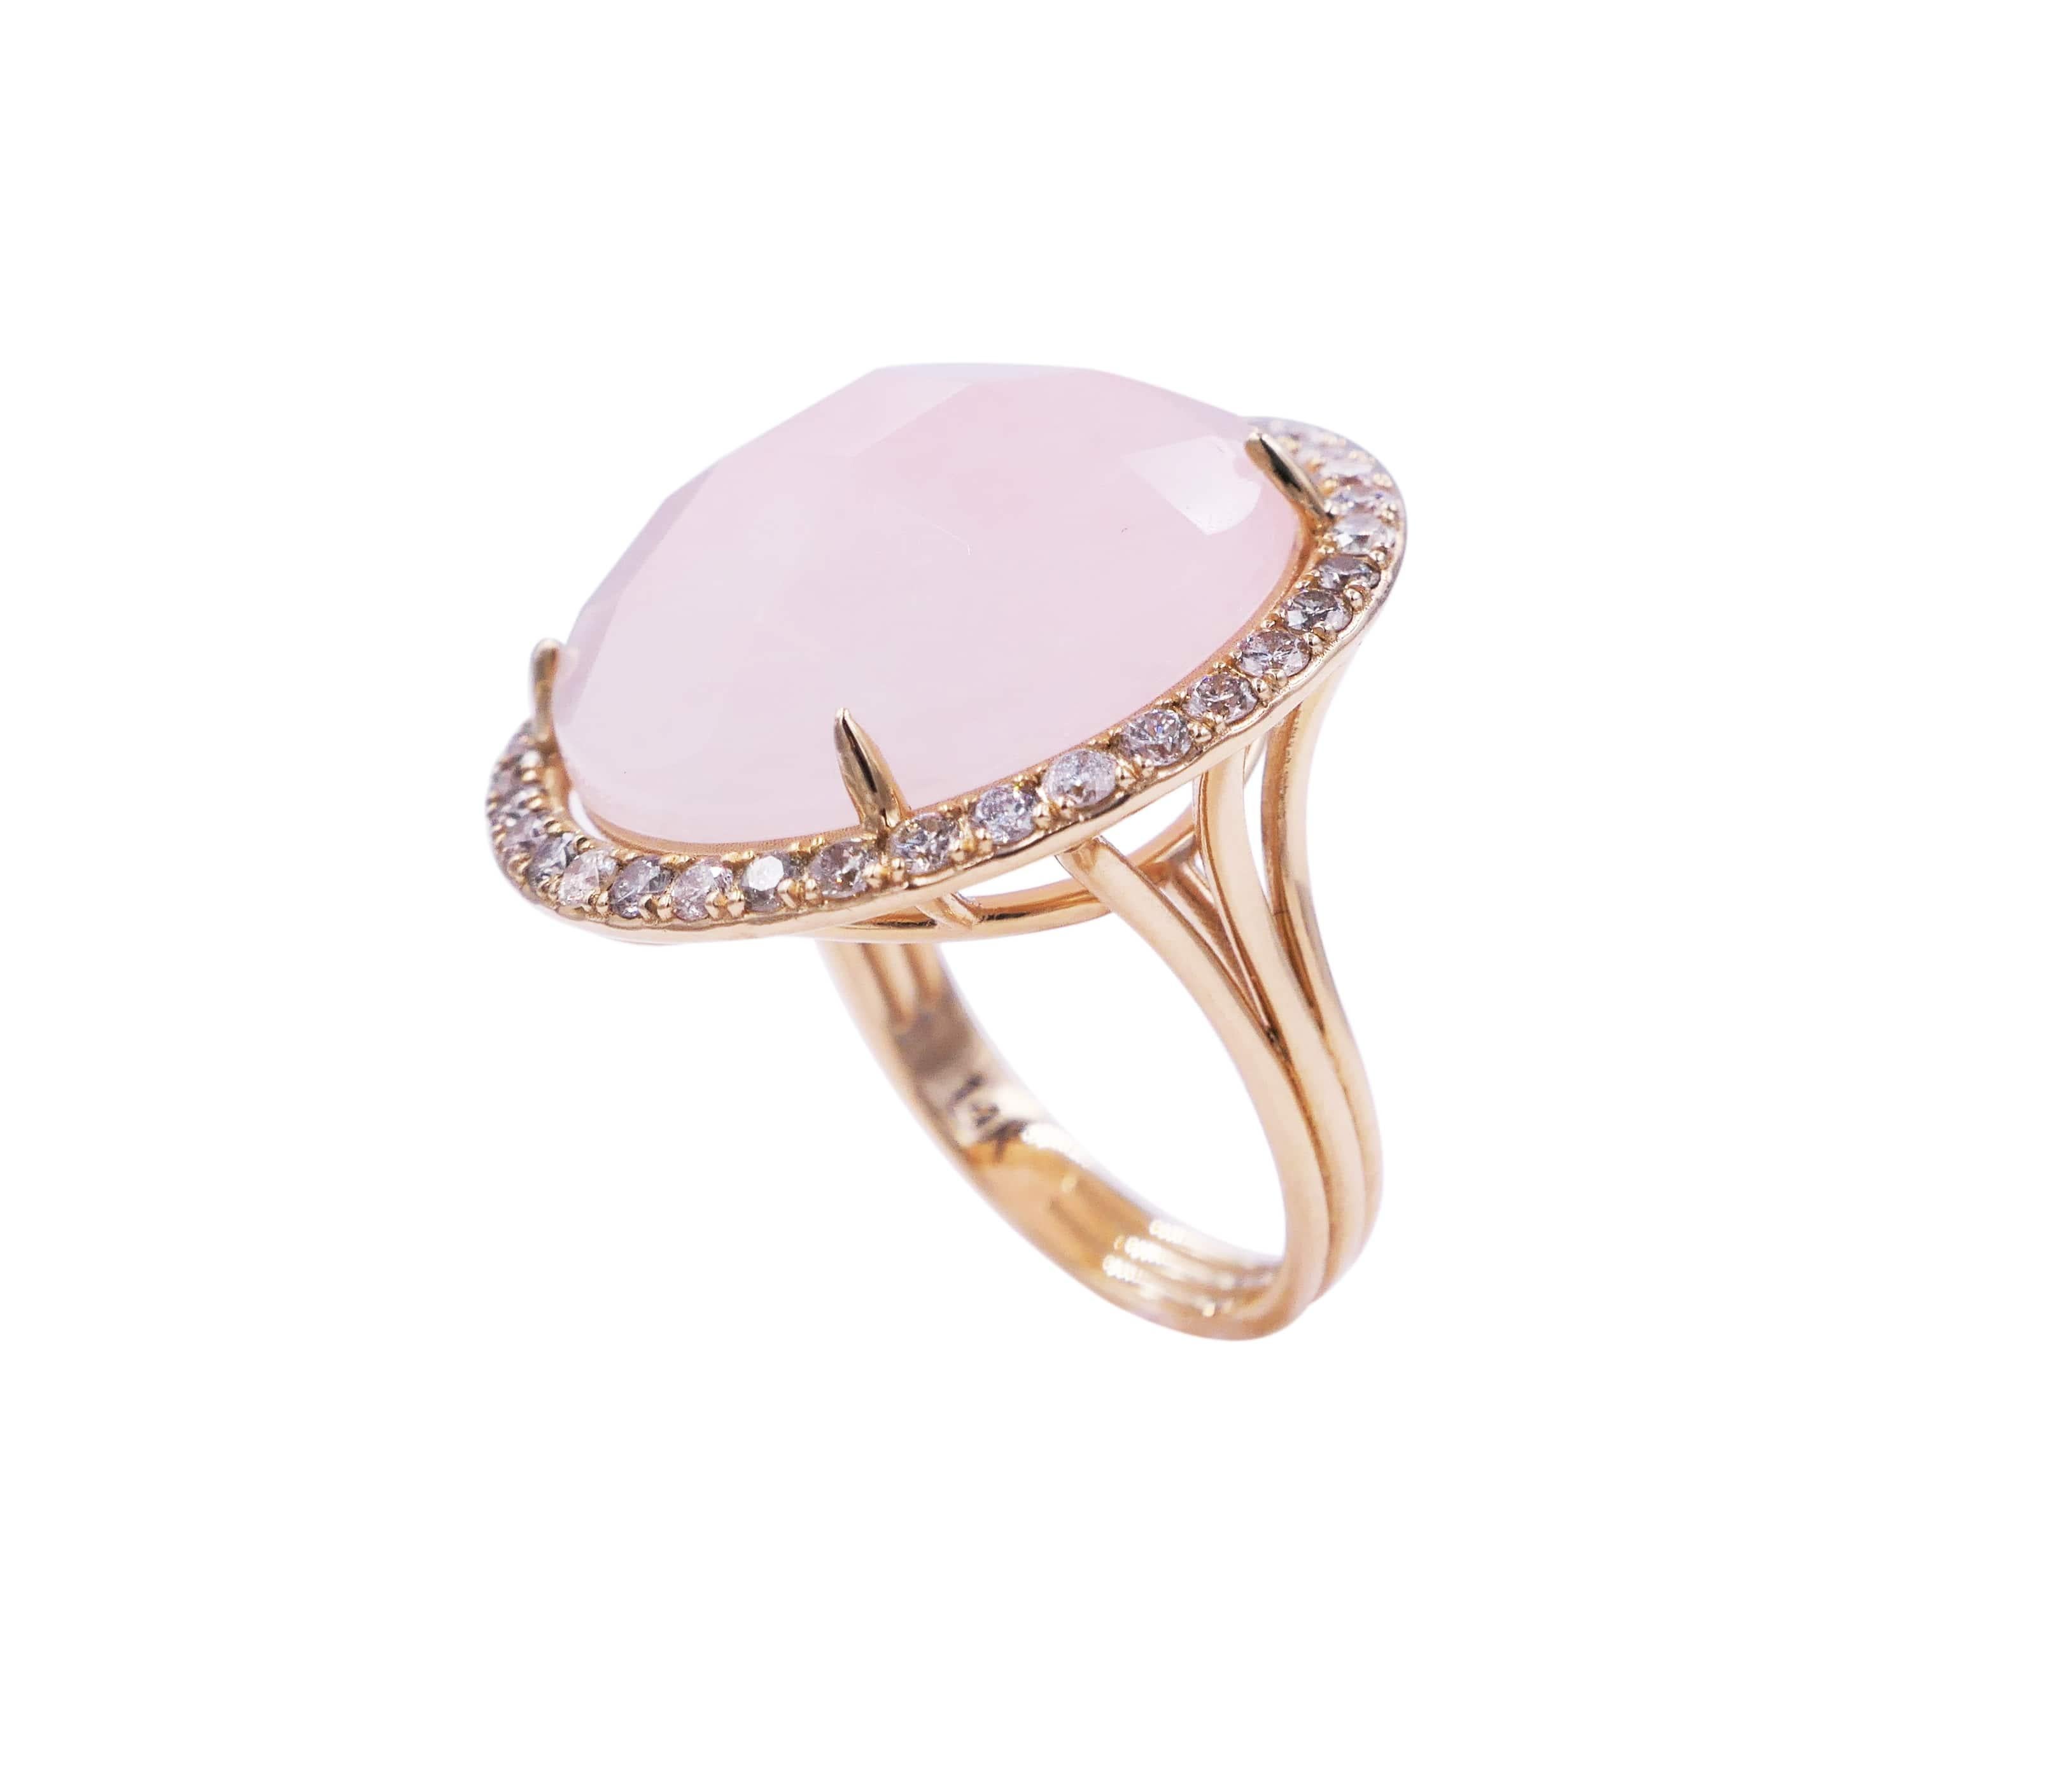 Cushion Cut Rose Quartz Round Faceted Cabochon Diamond Halo Pave 14 Karat Yellow Gold Ring For Sale